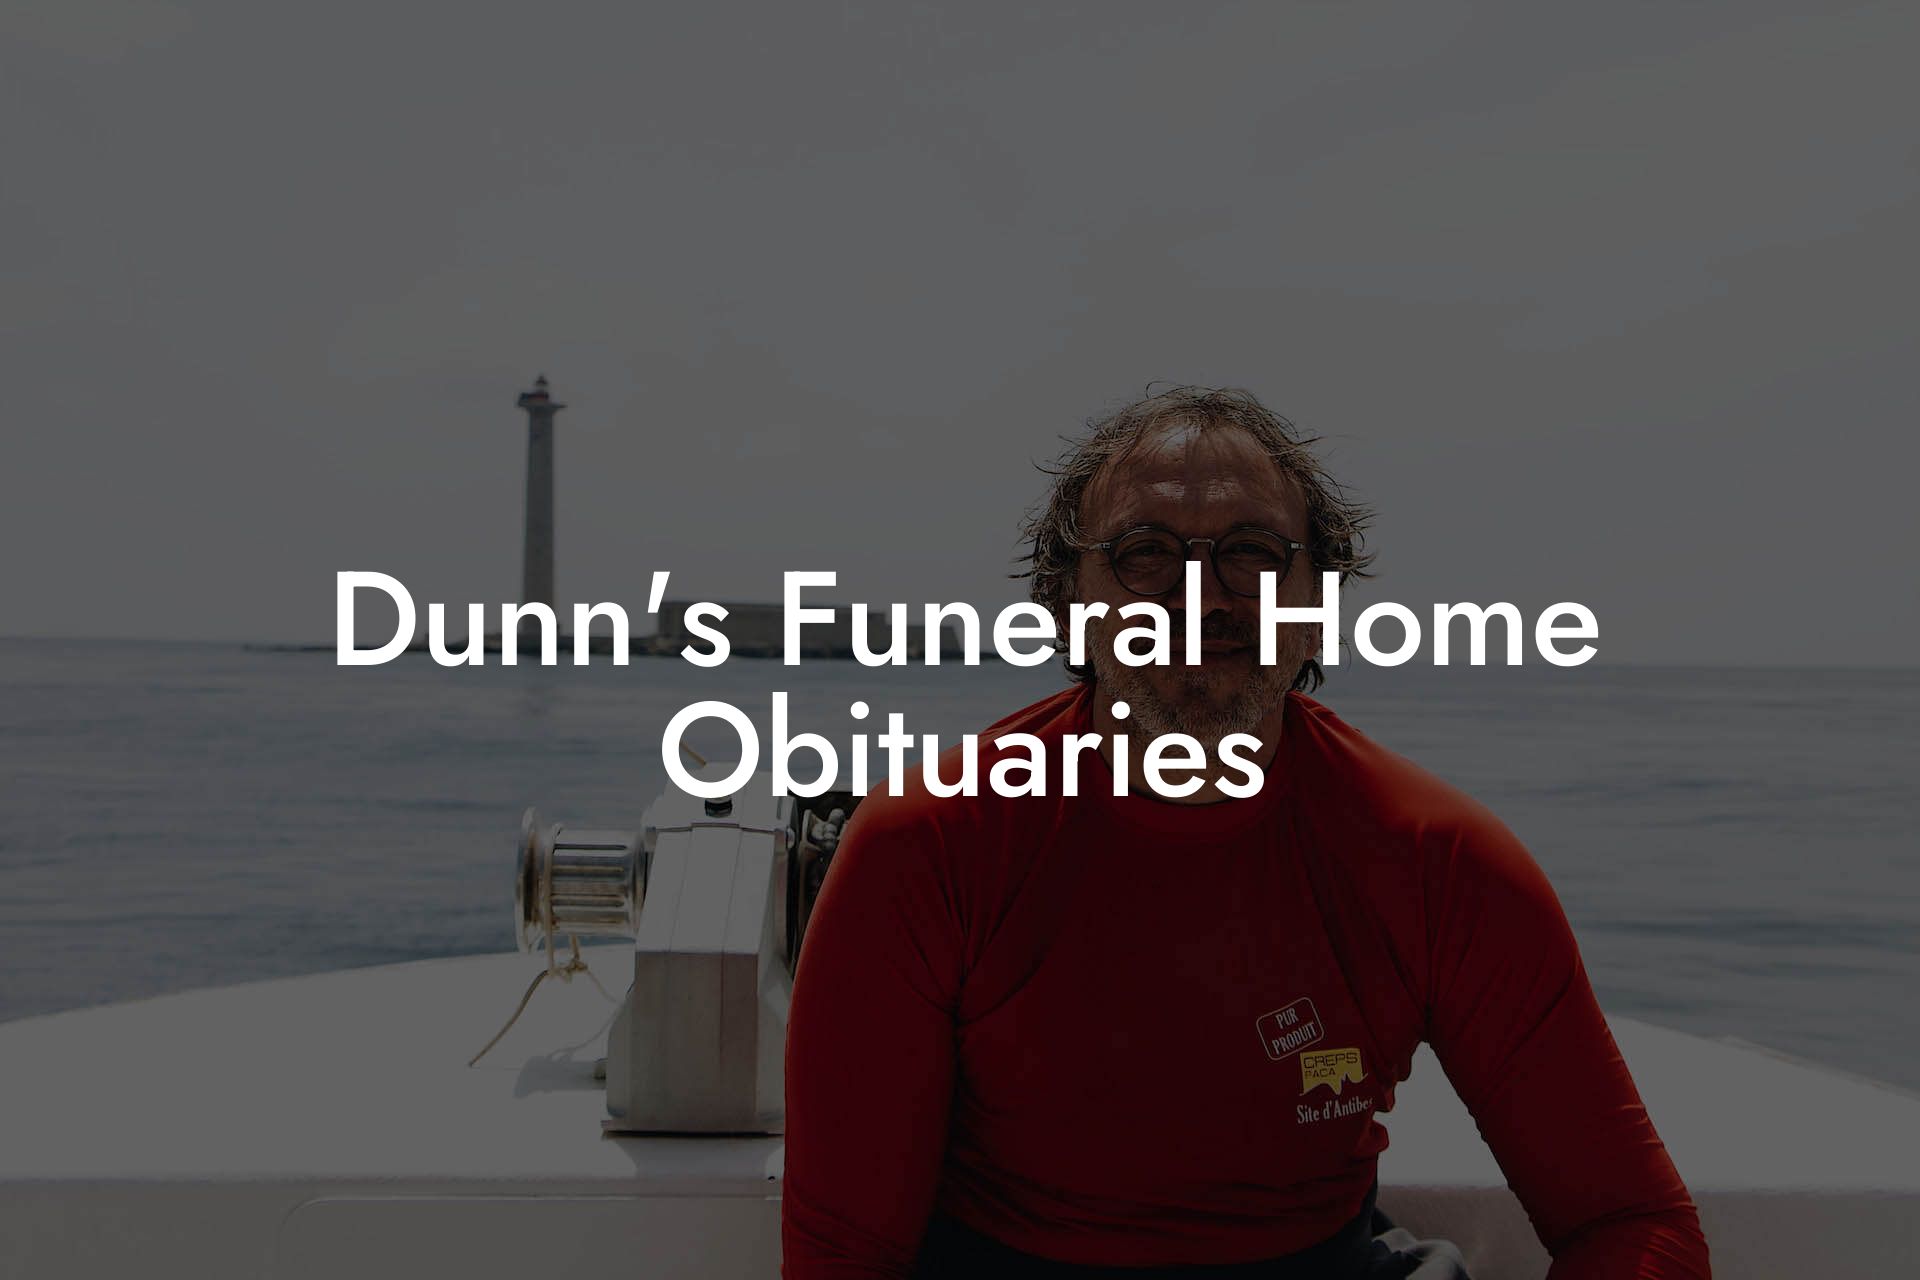 Dunn's Funeral Home Obituaries